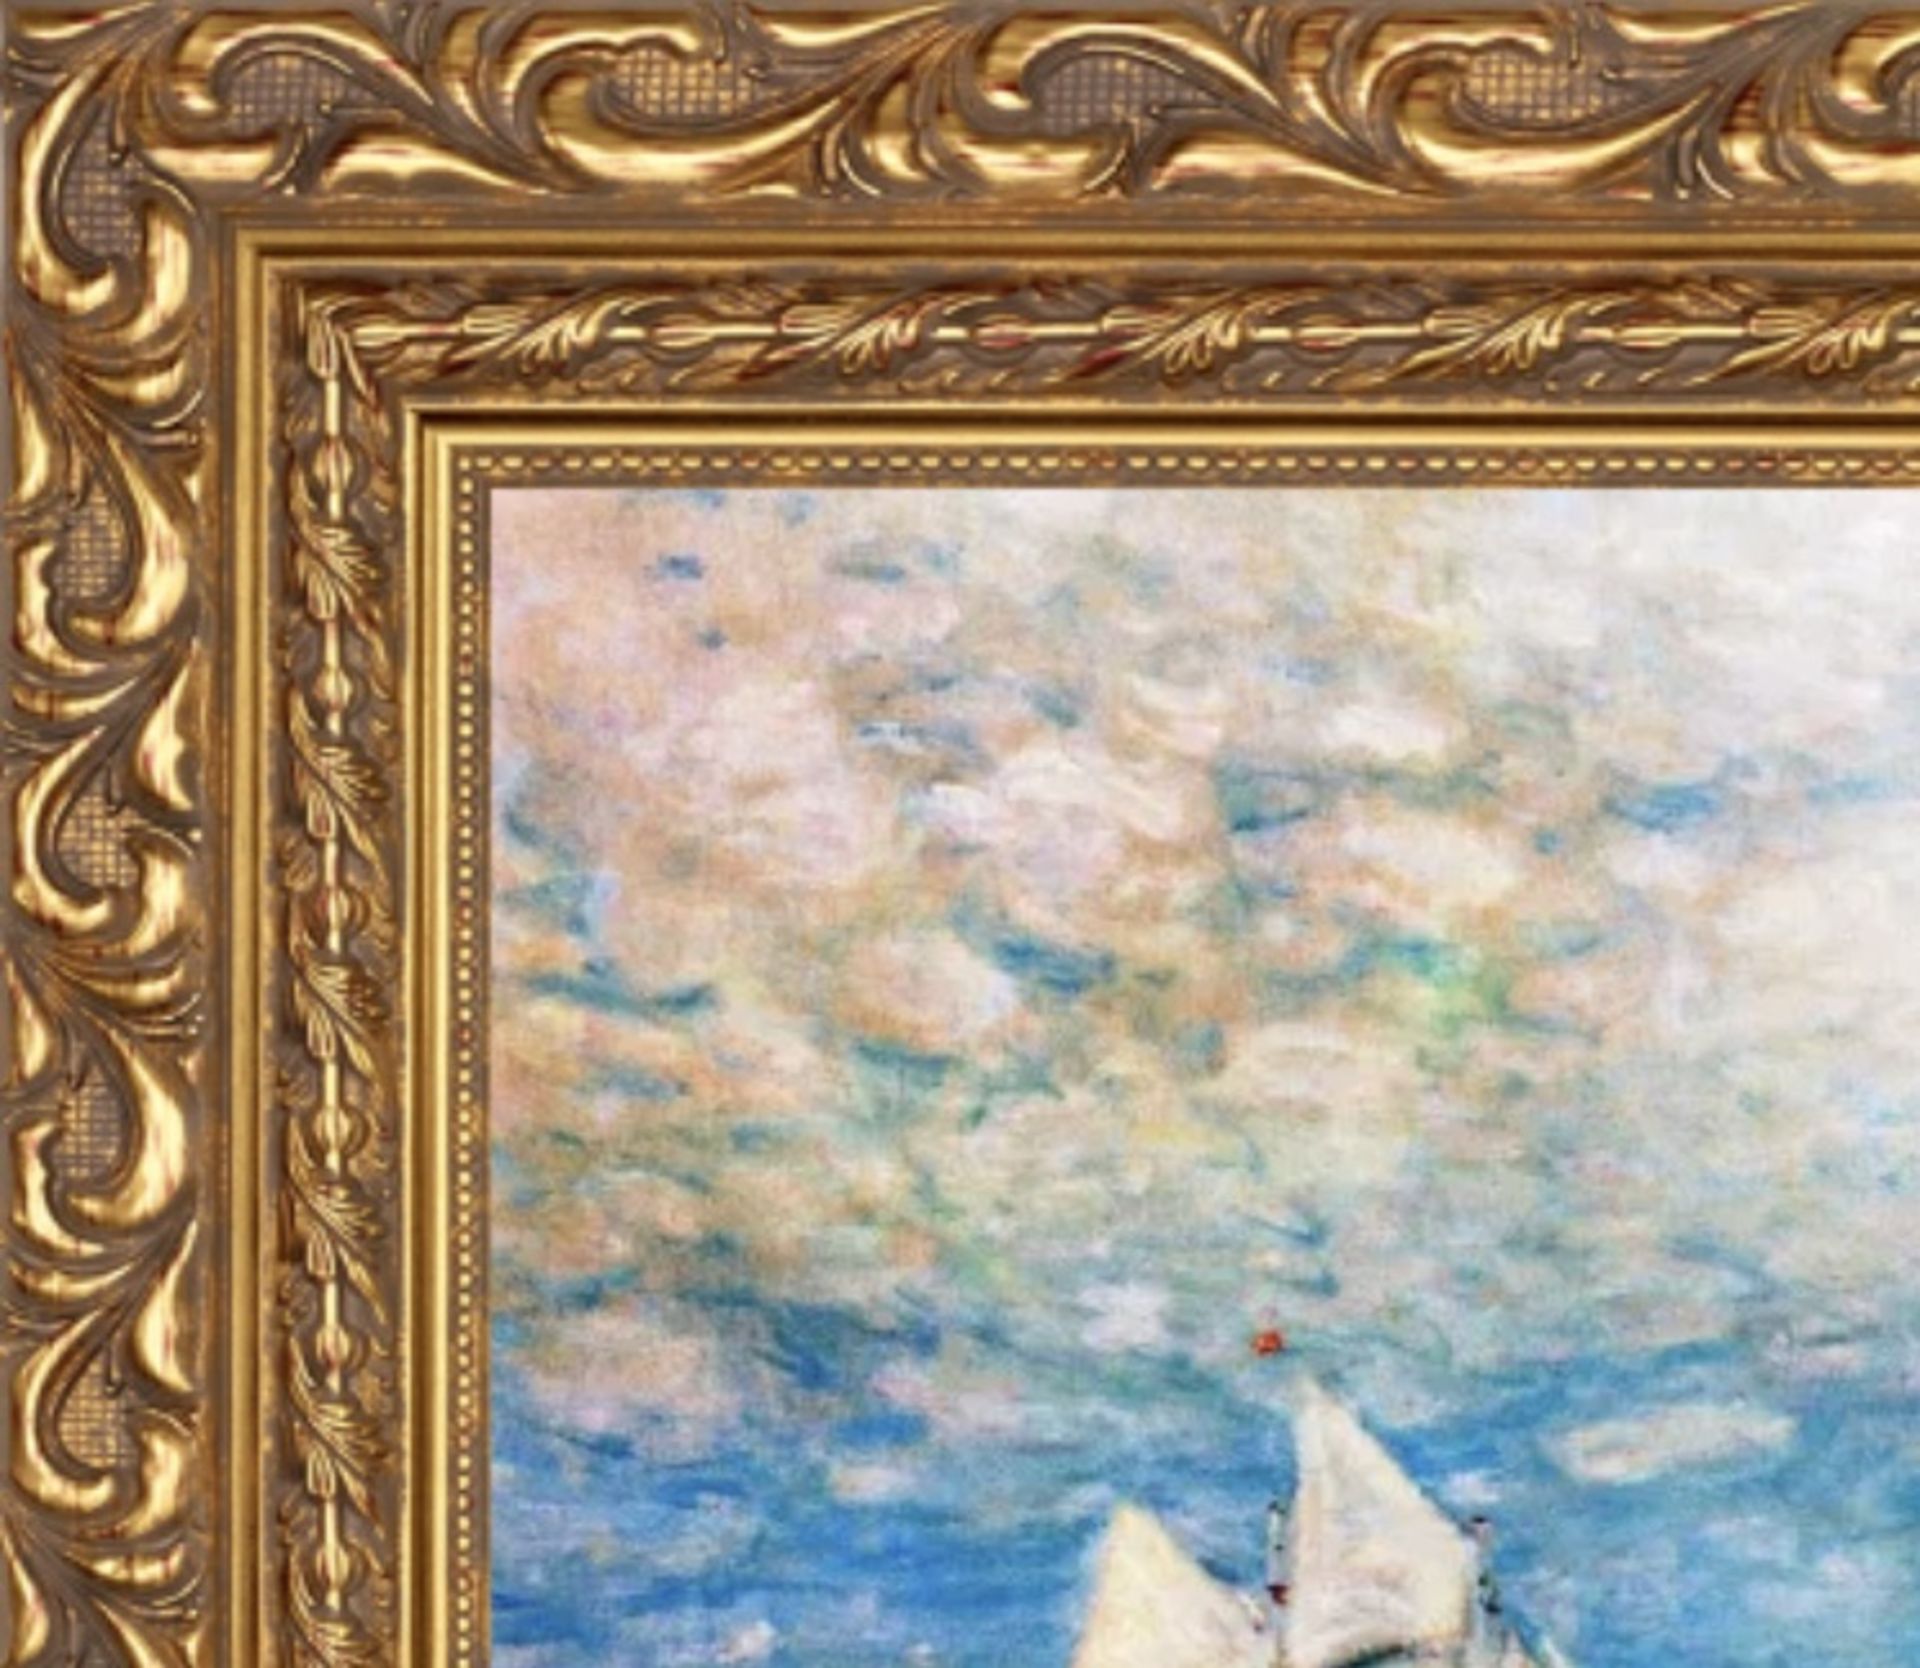 Frederick Childe Hassam "Sailing on Calm Seas, Gloucester Harbor" Oil Painting - Image 3 of 5